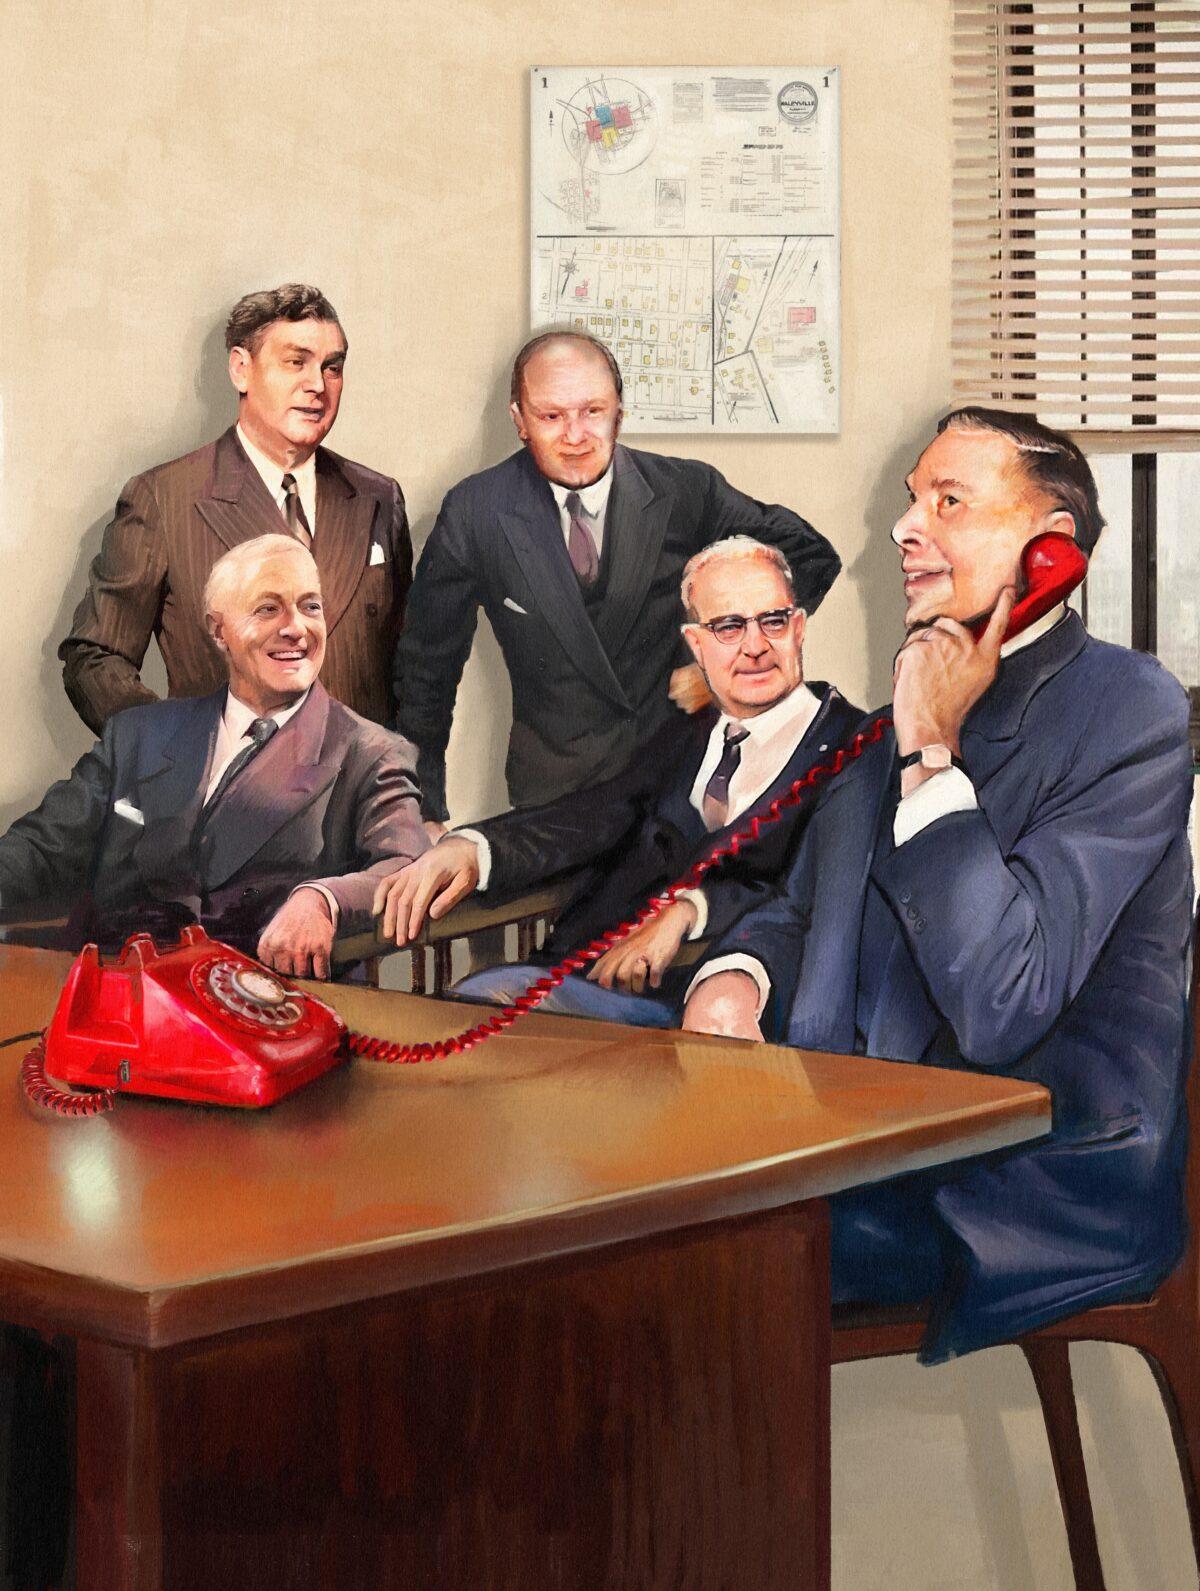 The bright red phone used for the first 911 emergency call, depicted here. (Illustration by Biba Kayewich for American Essence)